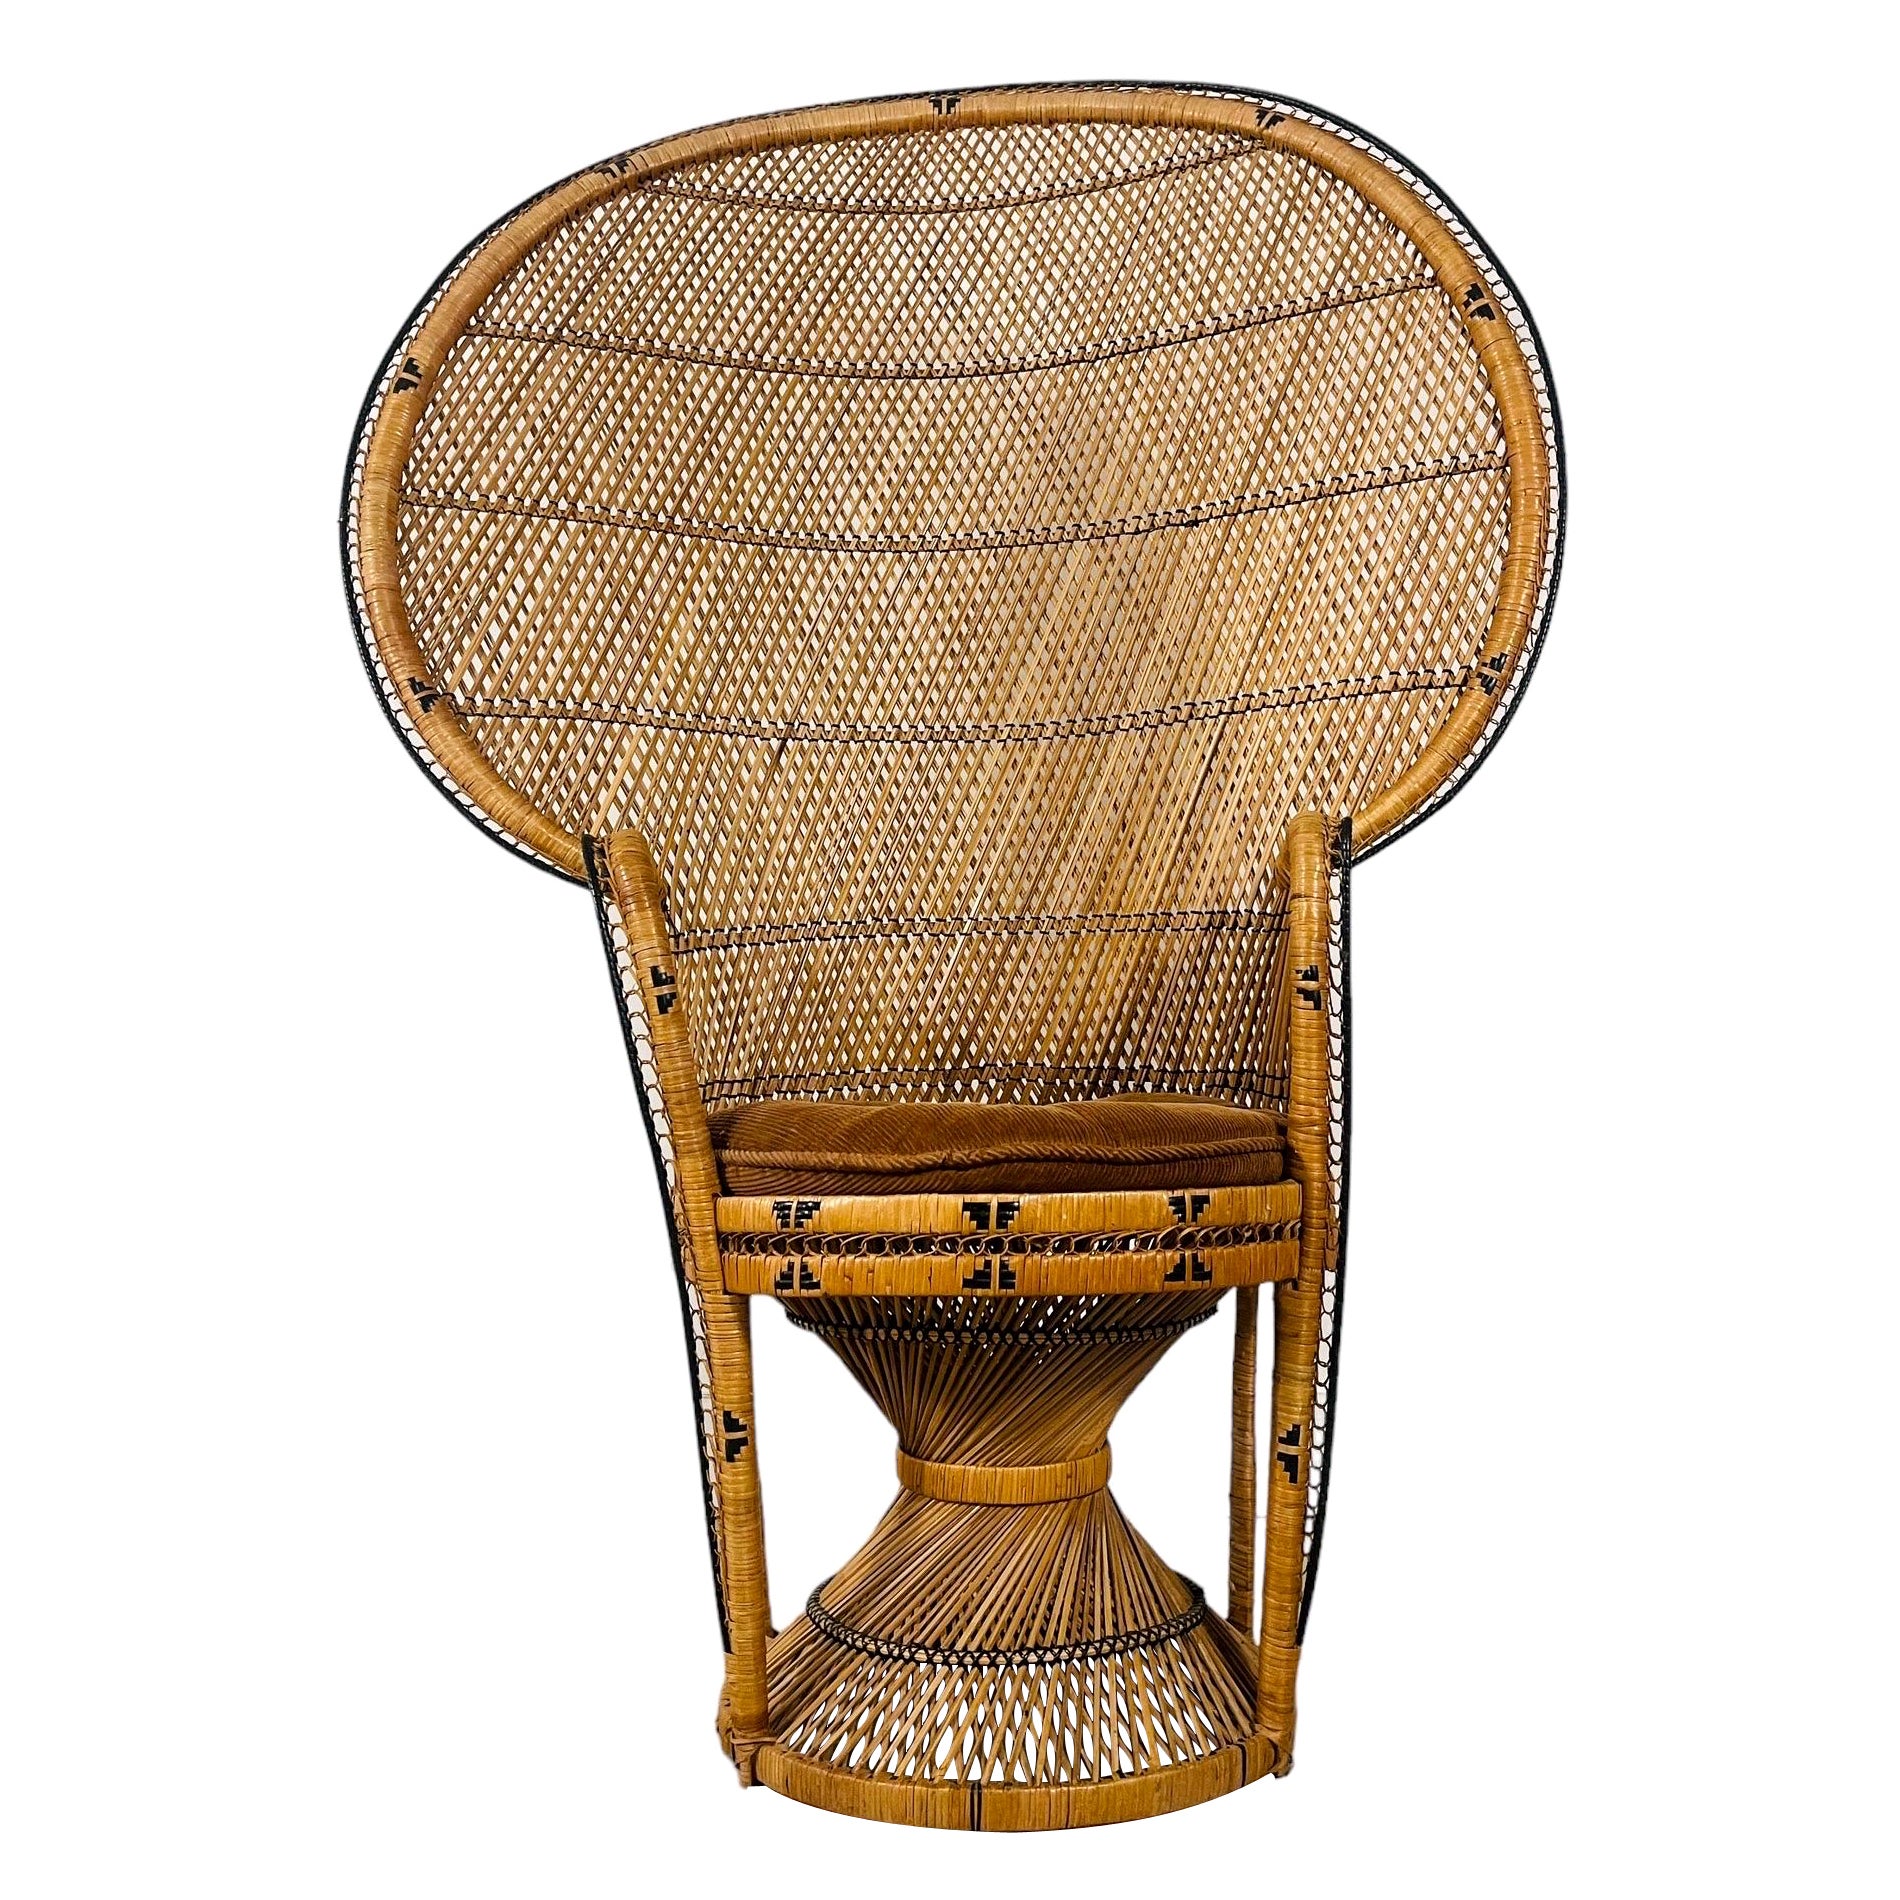 Vintage Boho Chic Wicker, Rattan Peacock Chair For Sale